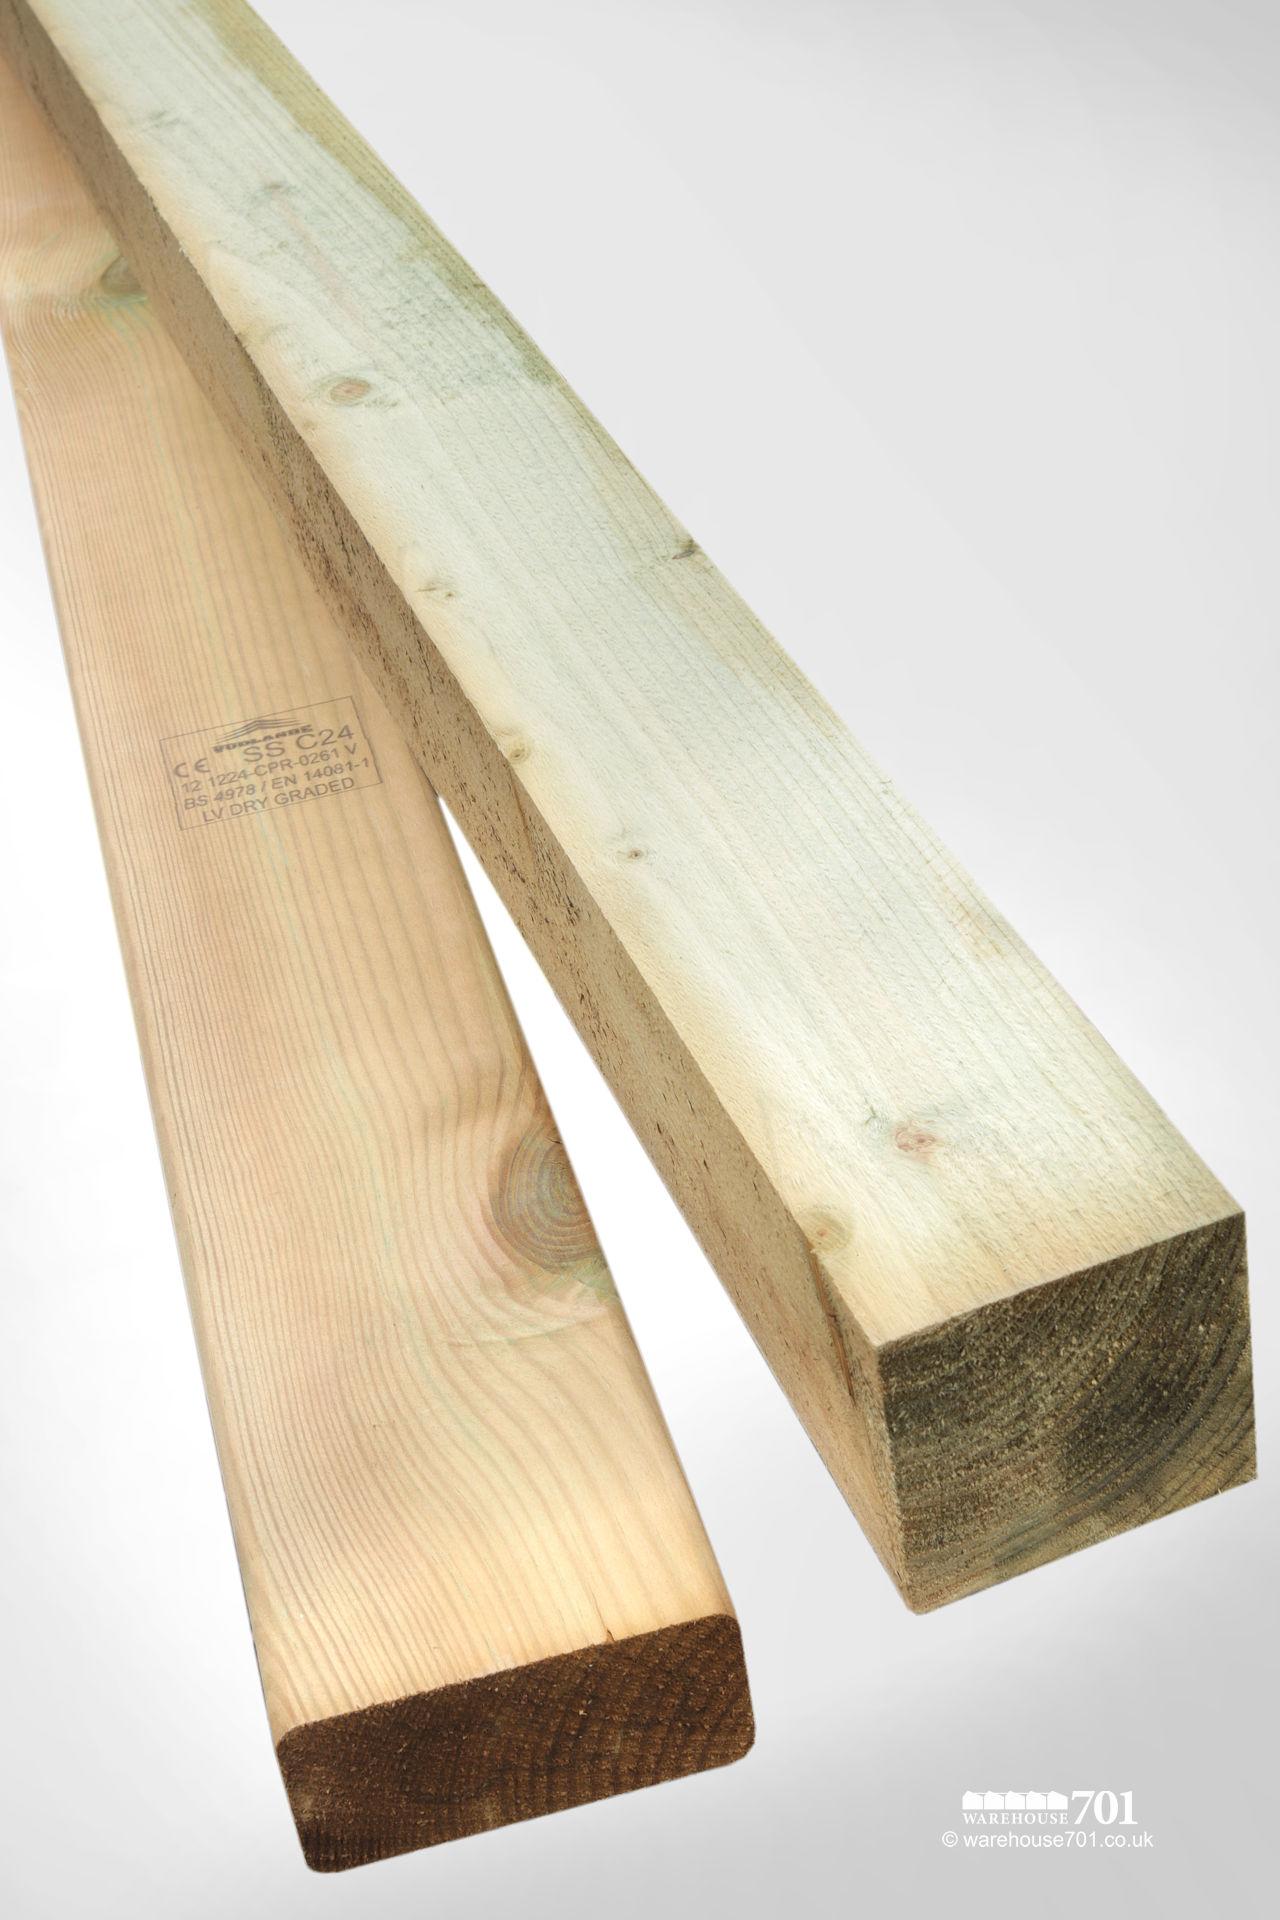 New Treated Softwood - Rough Sawn